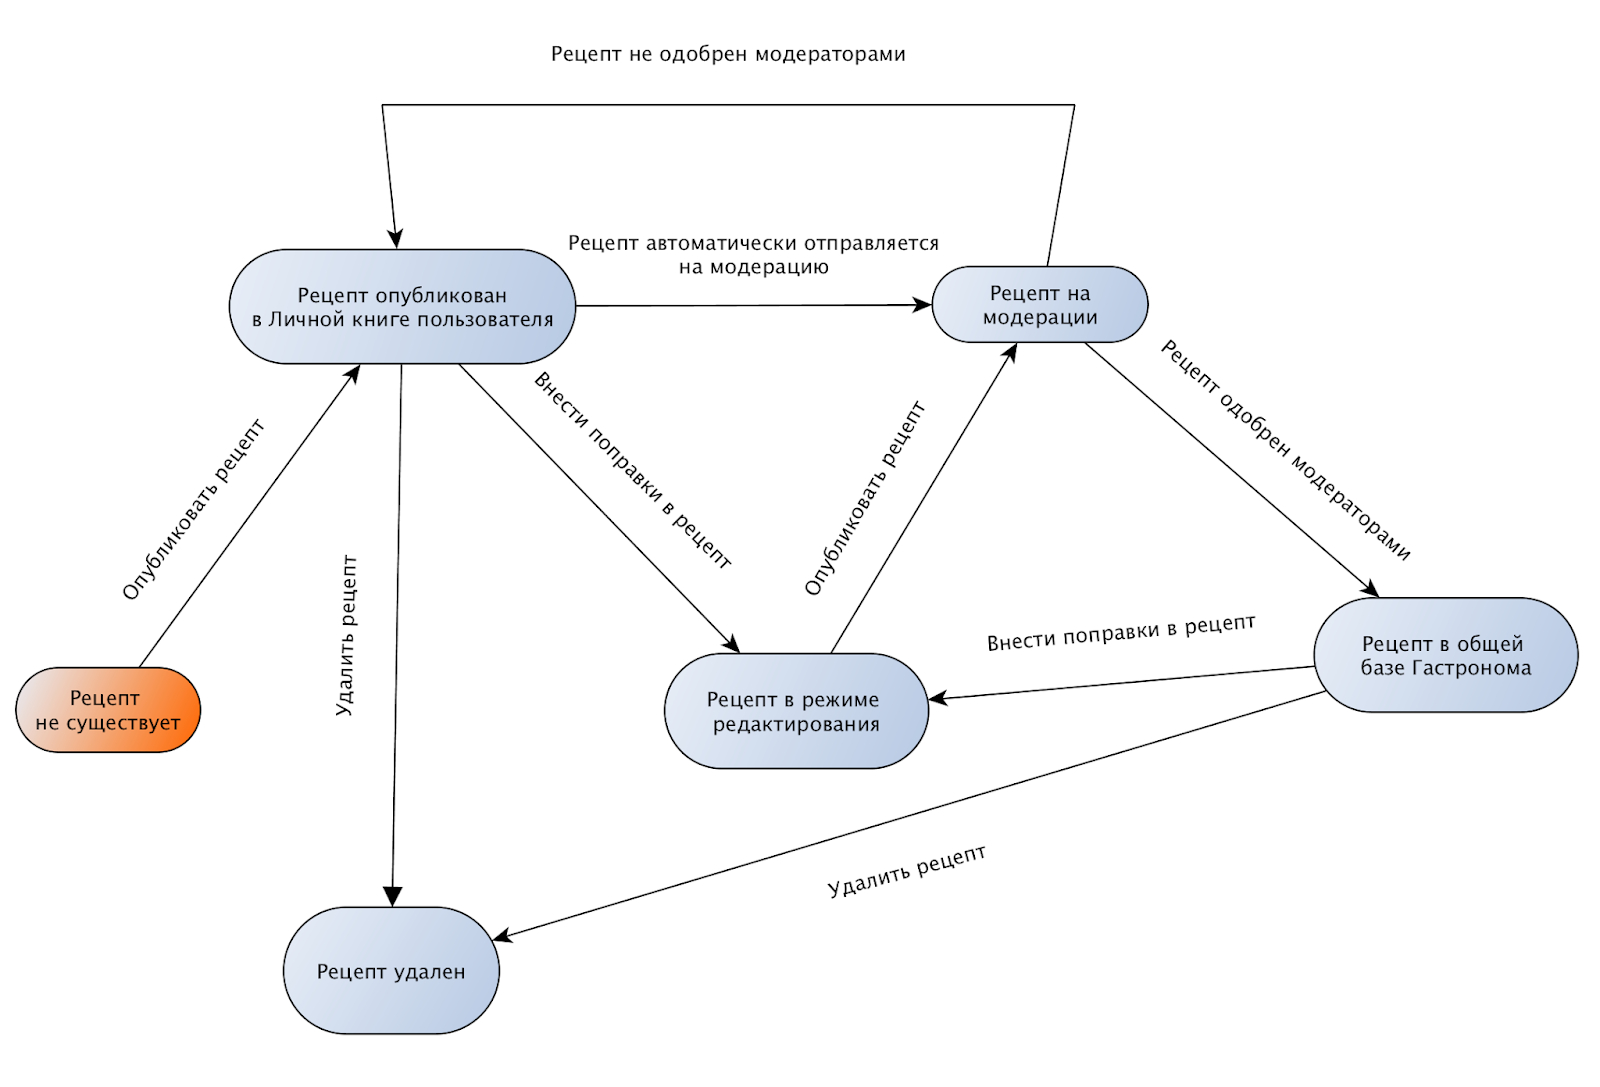 State Transition Diagram State Transition Testing